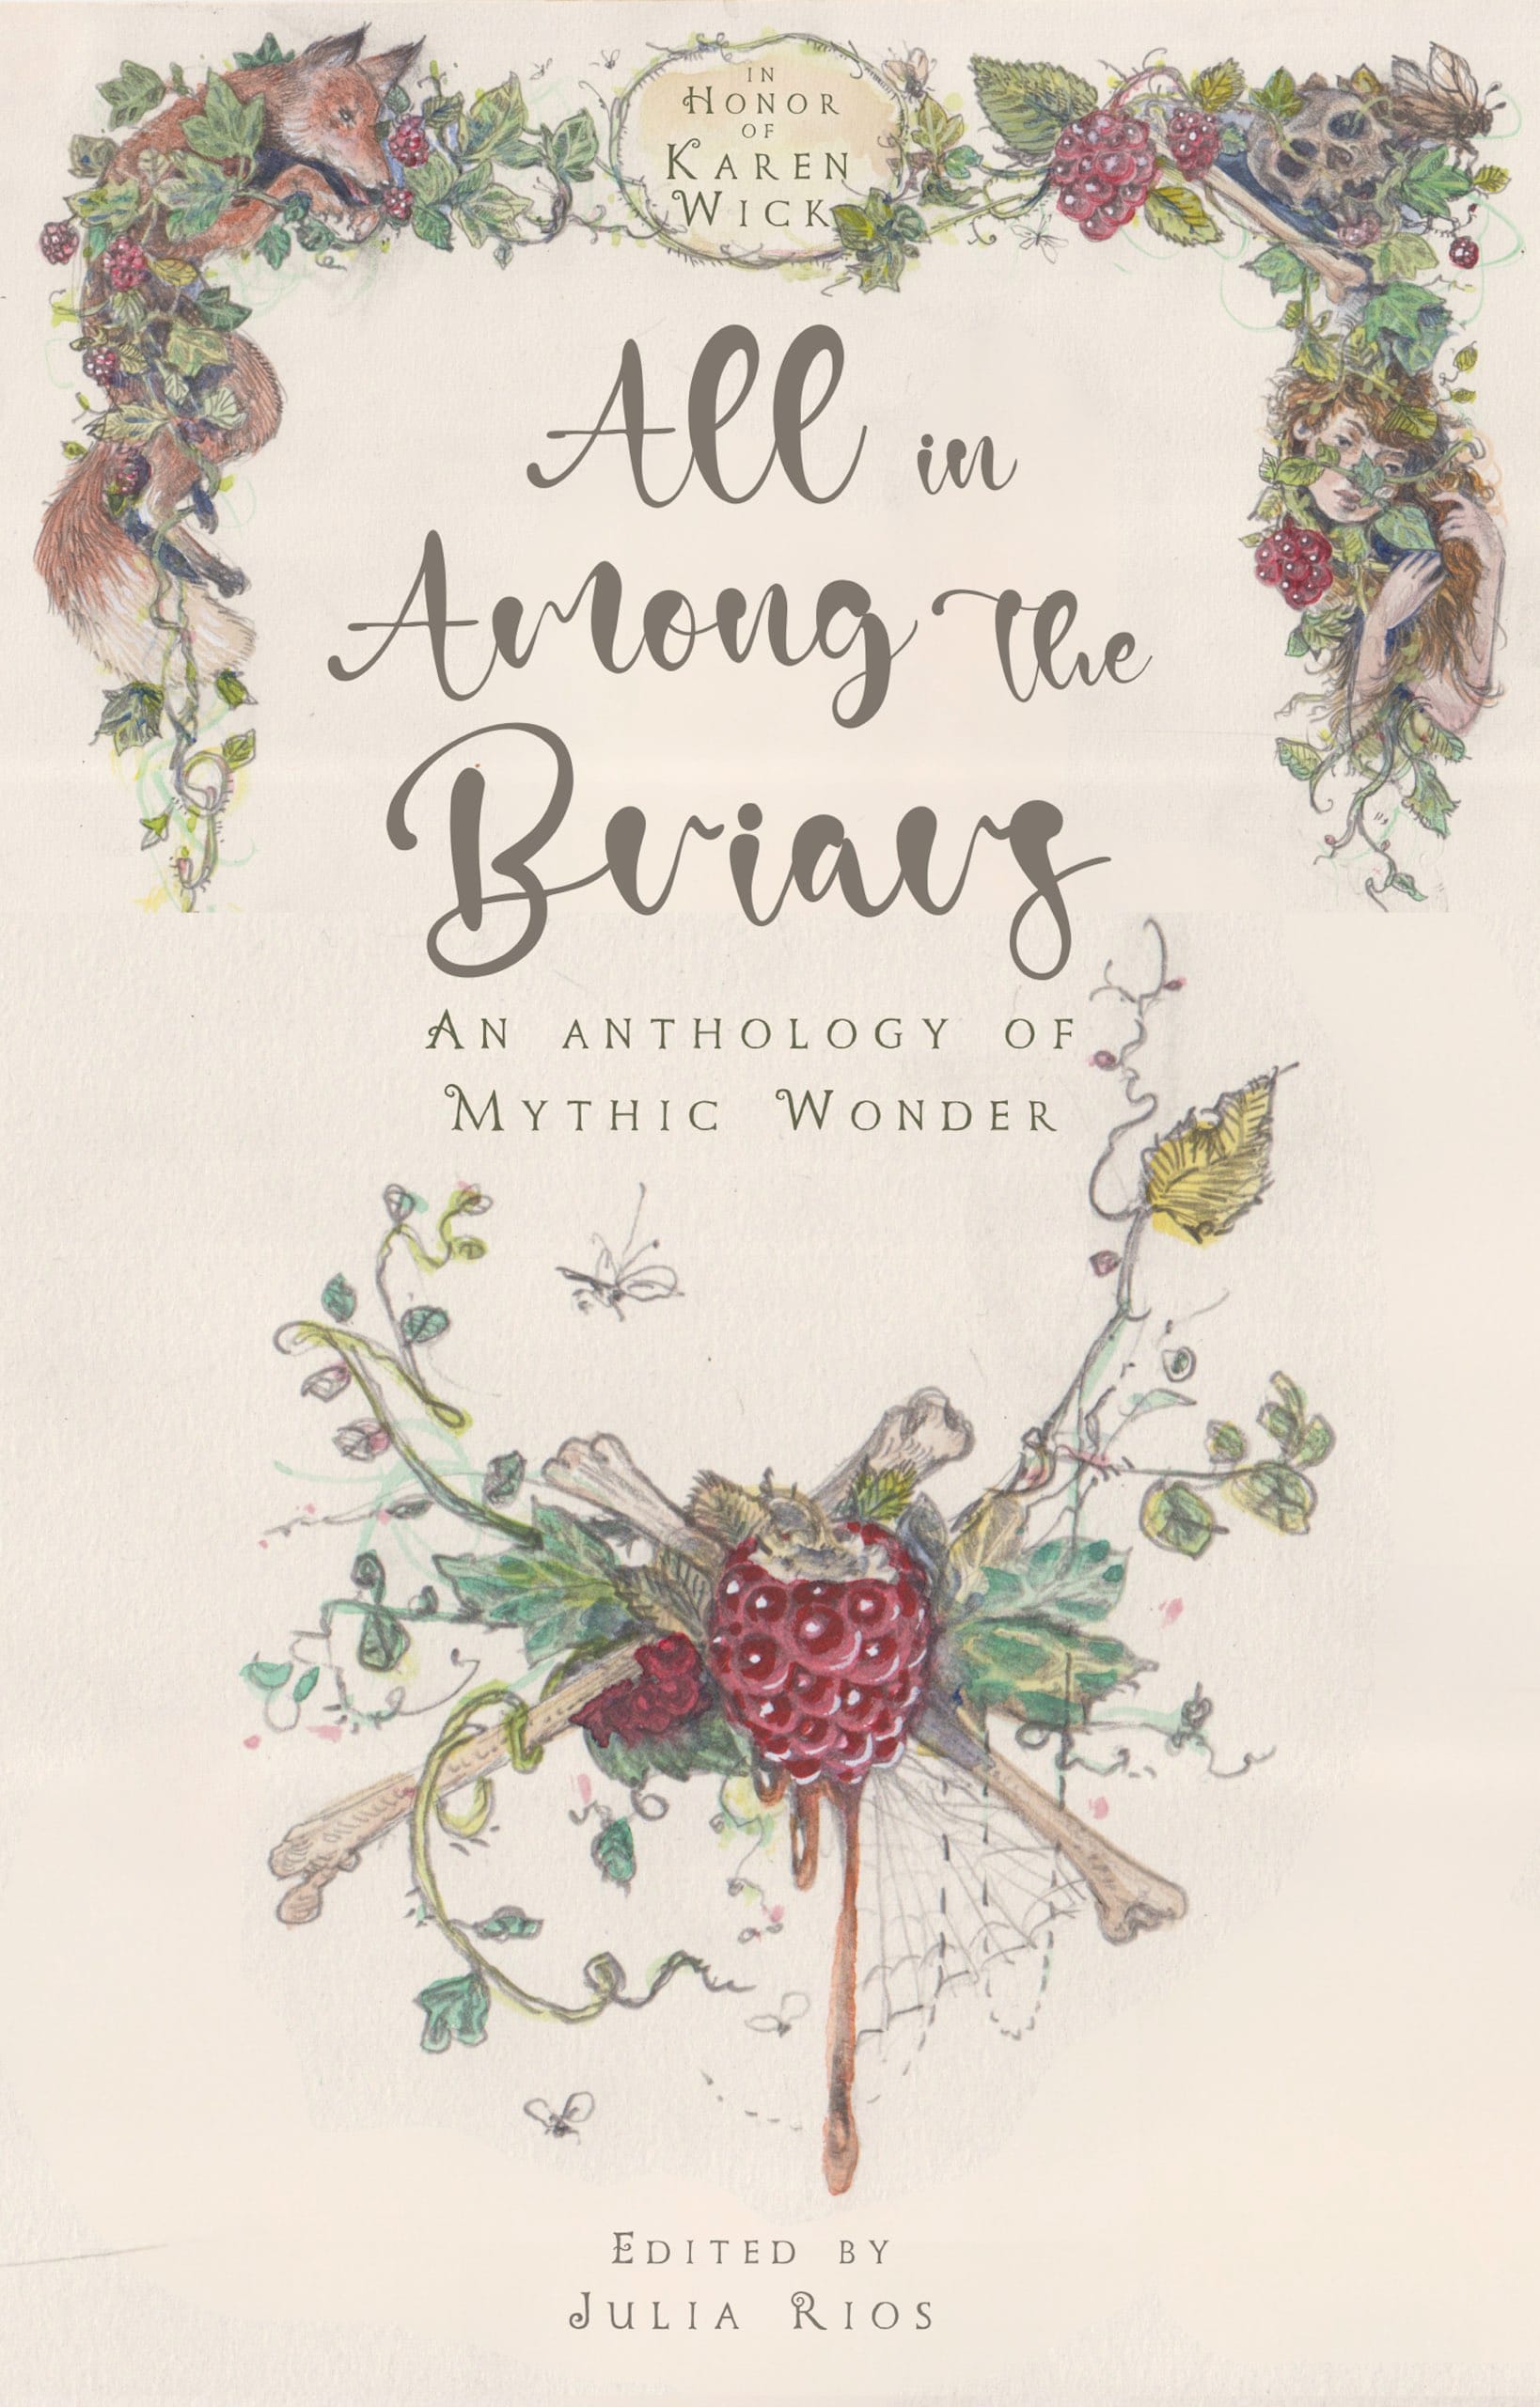 Cover for the anthology, titled ALL IN AMONG THE BRIARS: An Anthology of Mythic Wonder. A curtain-like frame at the top features a fox on the left hand side tangled up in berry brambles; on the right hand side, a beautiful young woman is half-obscured by the same brambles while playing with her long red hair. The brambles also tangle up individual bones. Beneath the title, a centrepiece of bones, berry, spiderwebbing and flying insects drips something that could be juice or blood. Despite the suggestion of gore the image is dainty, in an illustrated fairy tale storybook style. A disc at the top centre of the frame contains the words "In Honor of Karen Wick."